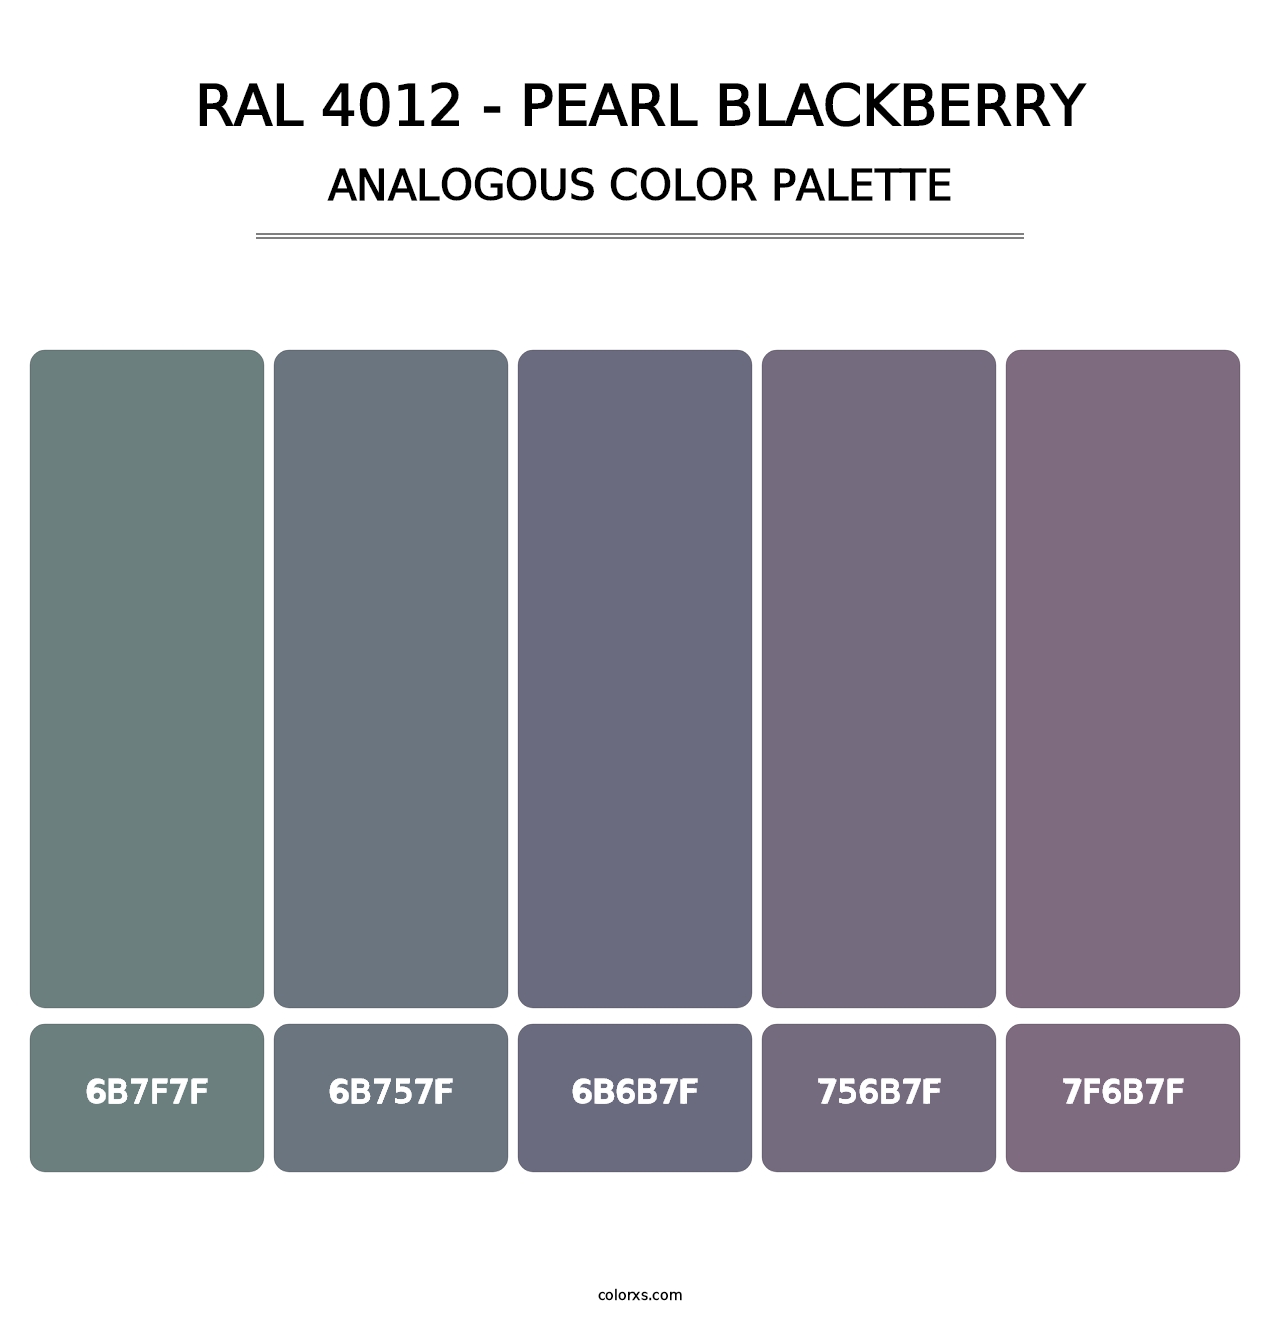 RAL 4012 - Pearl Blackberry - Analogous Color Palette